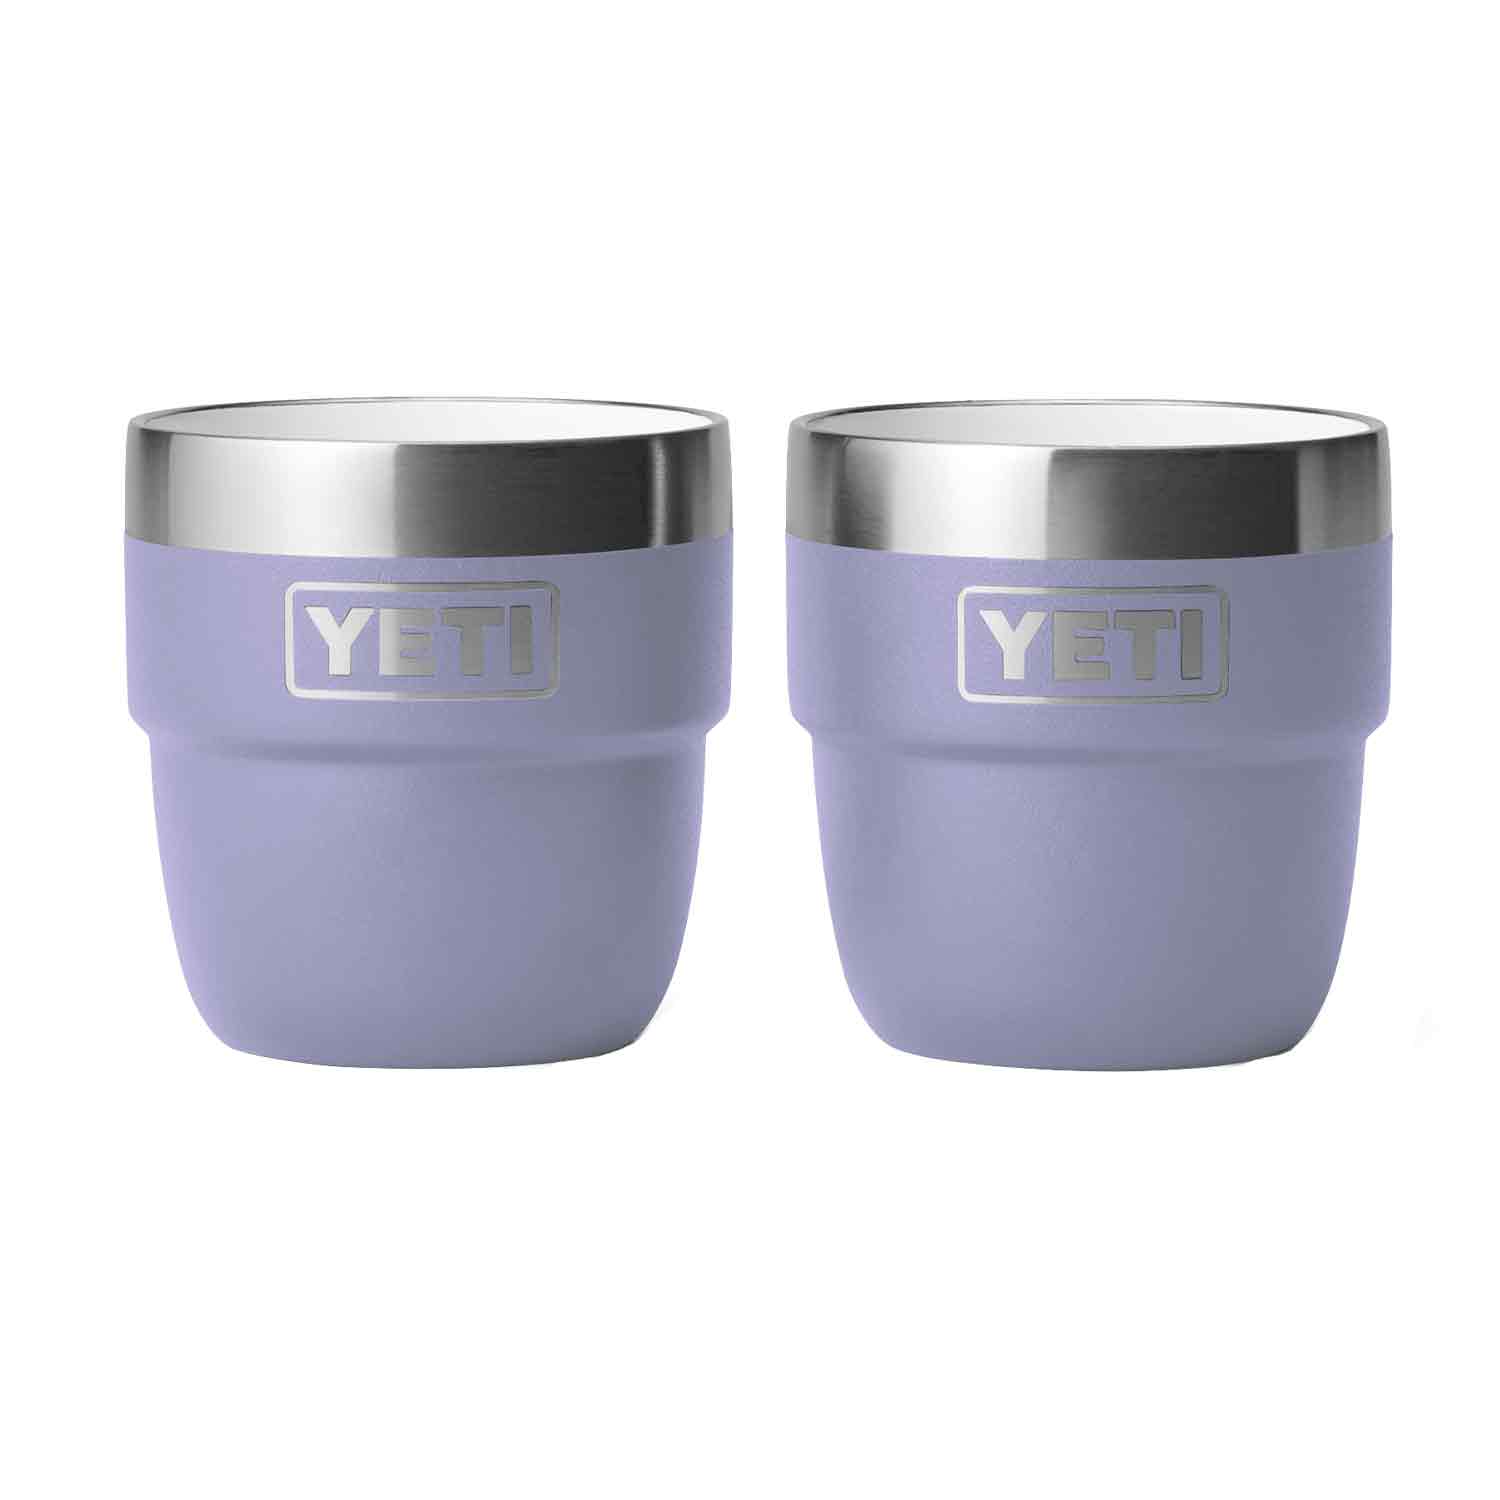 YETI Stackable Cup (2-pk)